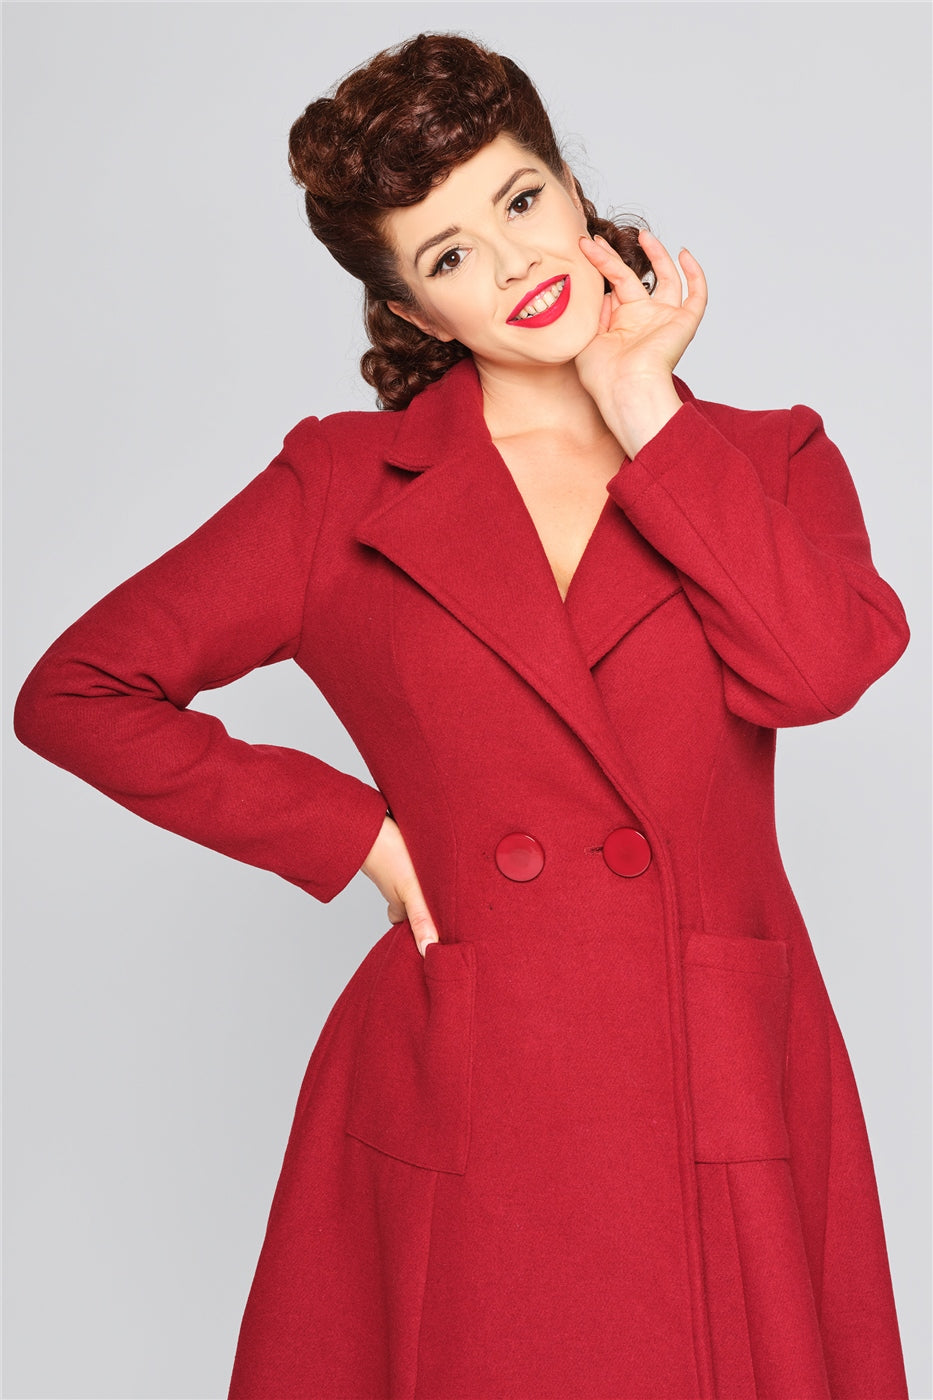 beautiful brunette wearing red lipstick and a burgundy coat with a classic vintage collar and two buttons at the front